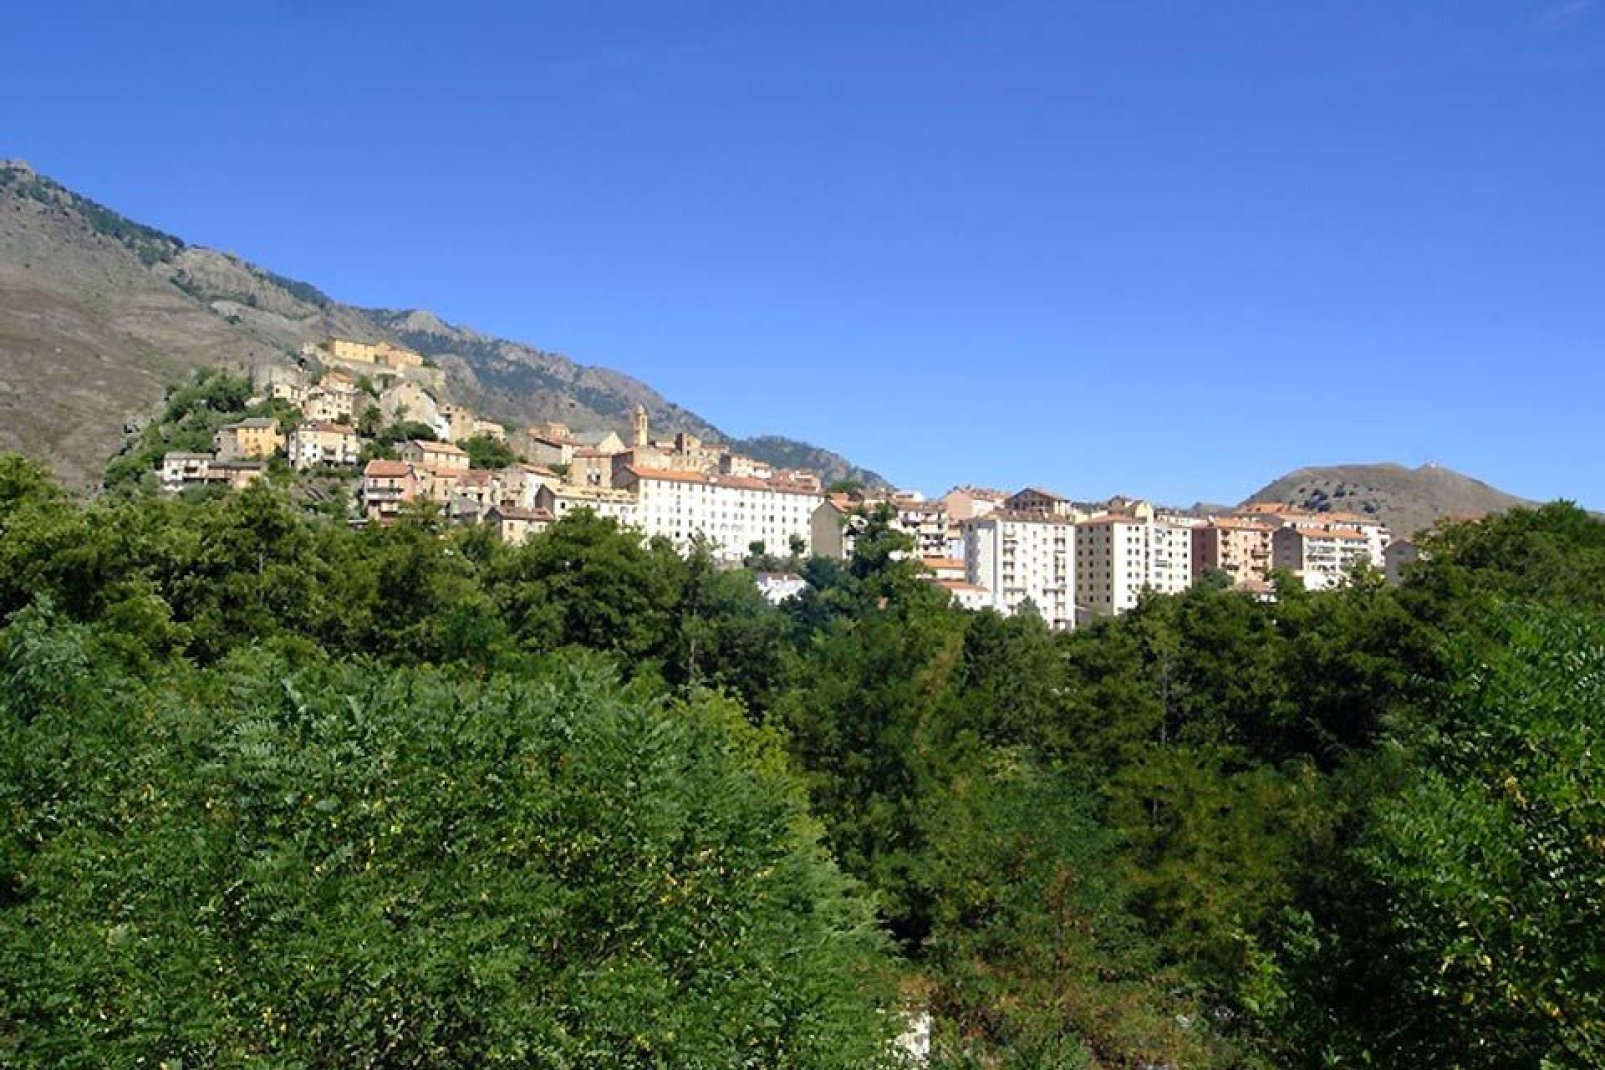 Corte is located in the middle of Corsica at 450m of altitude, between Bastia and Ajaccio.